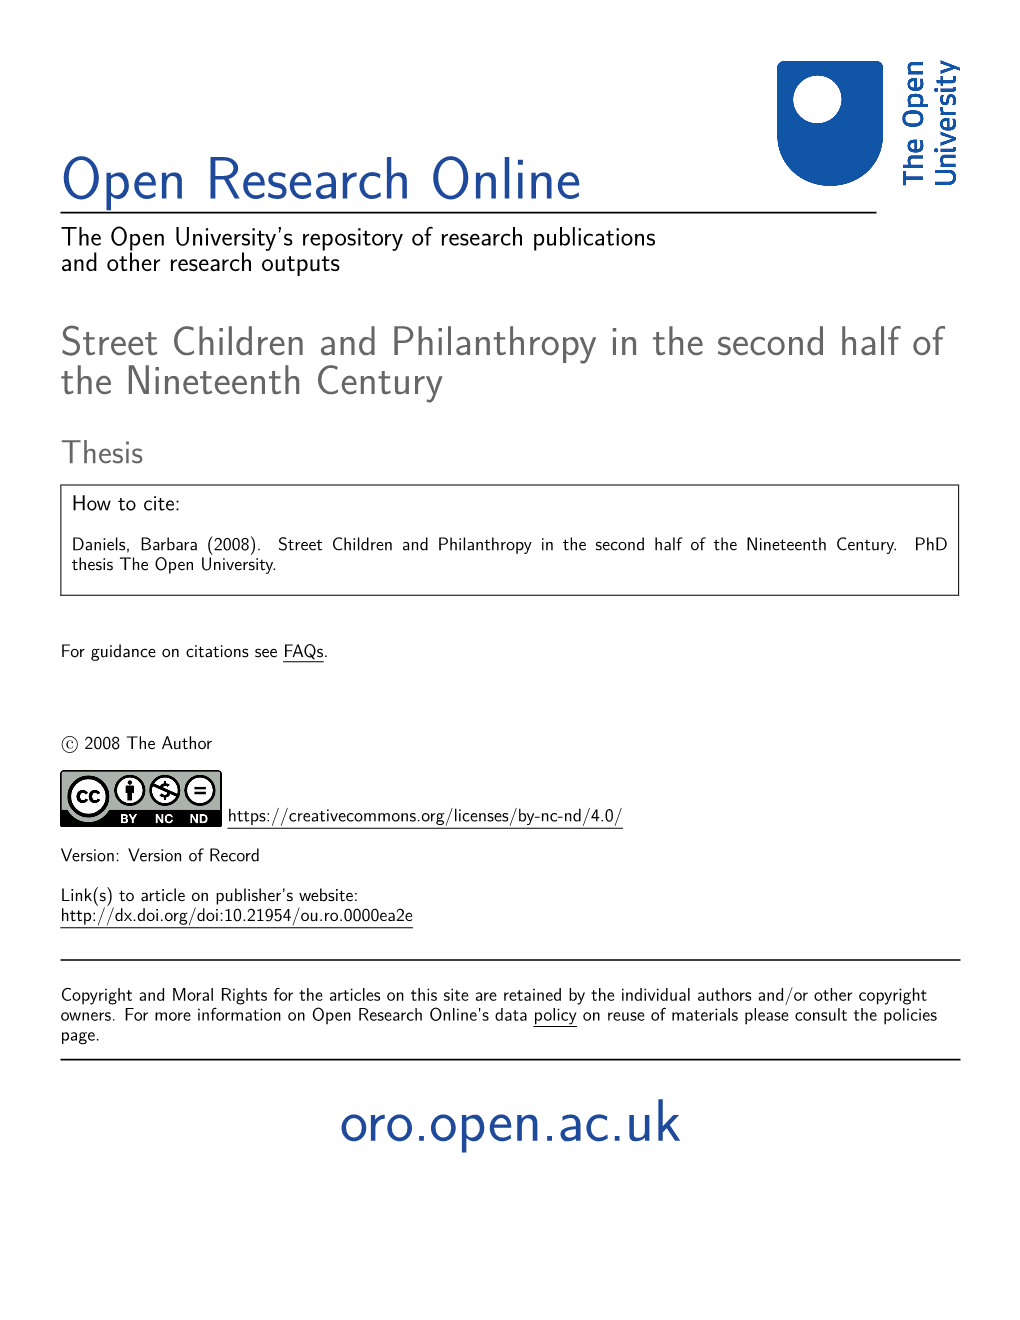 Street Children and Philanthropy in the Second Half of the Nineteenth Century